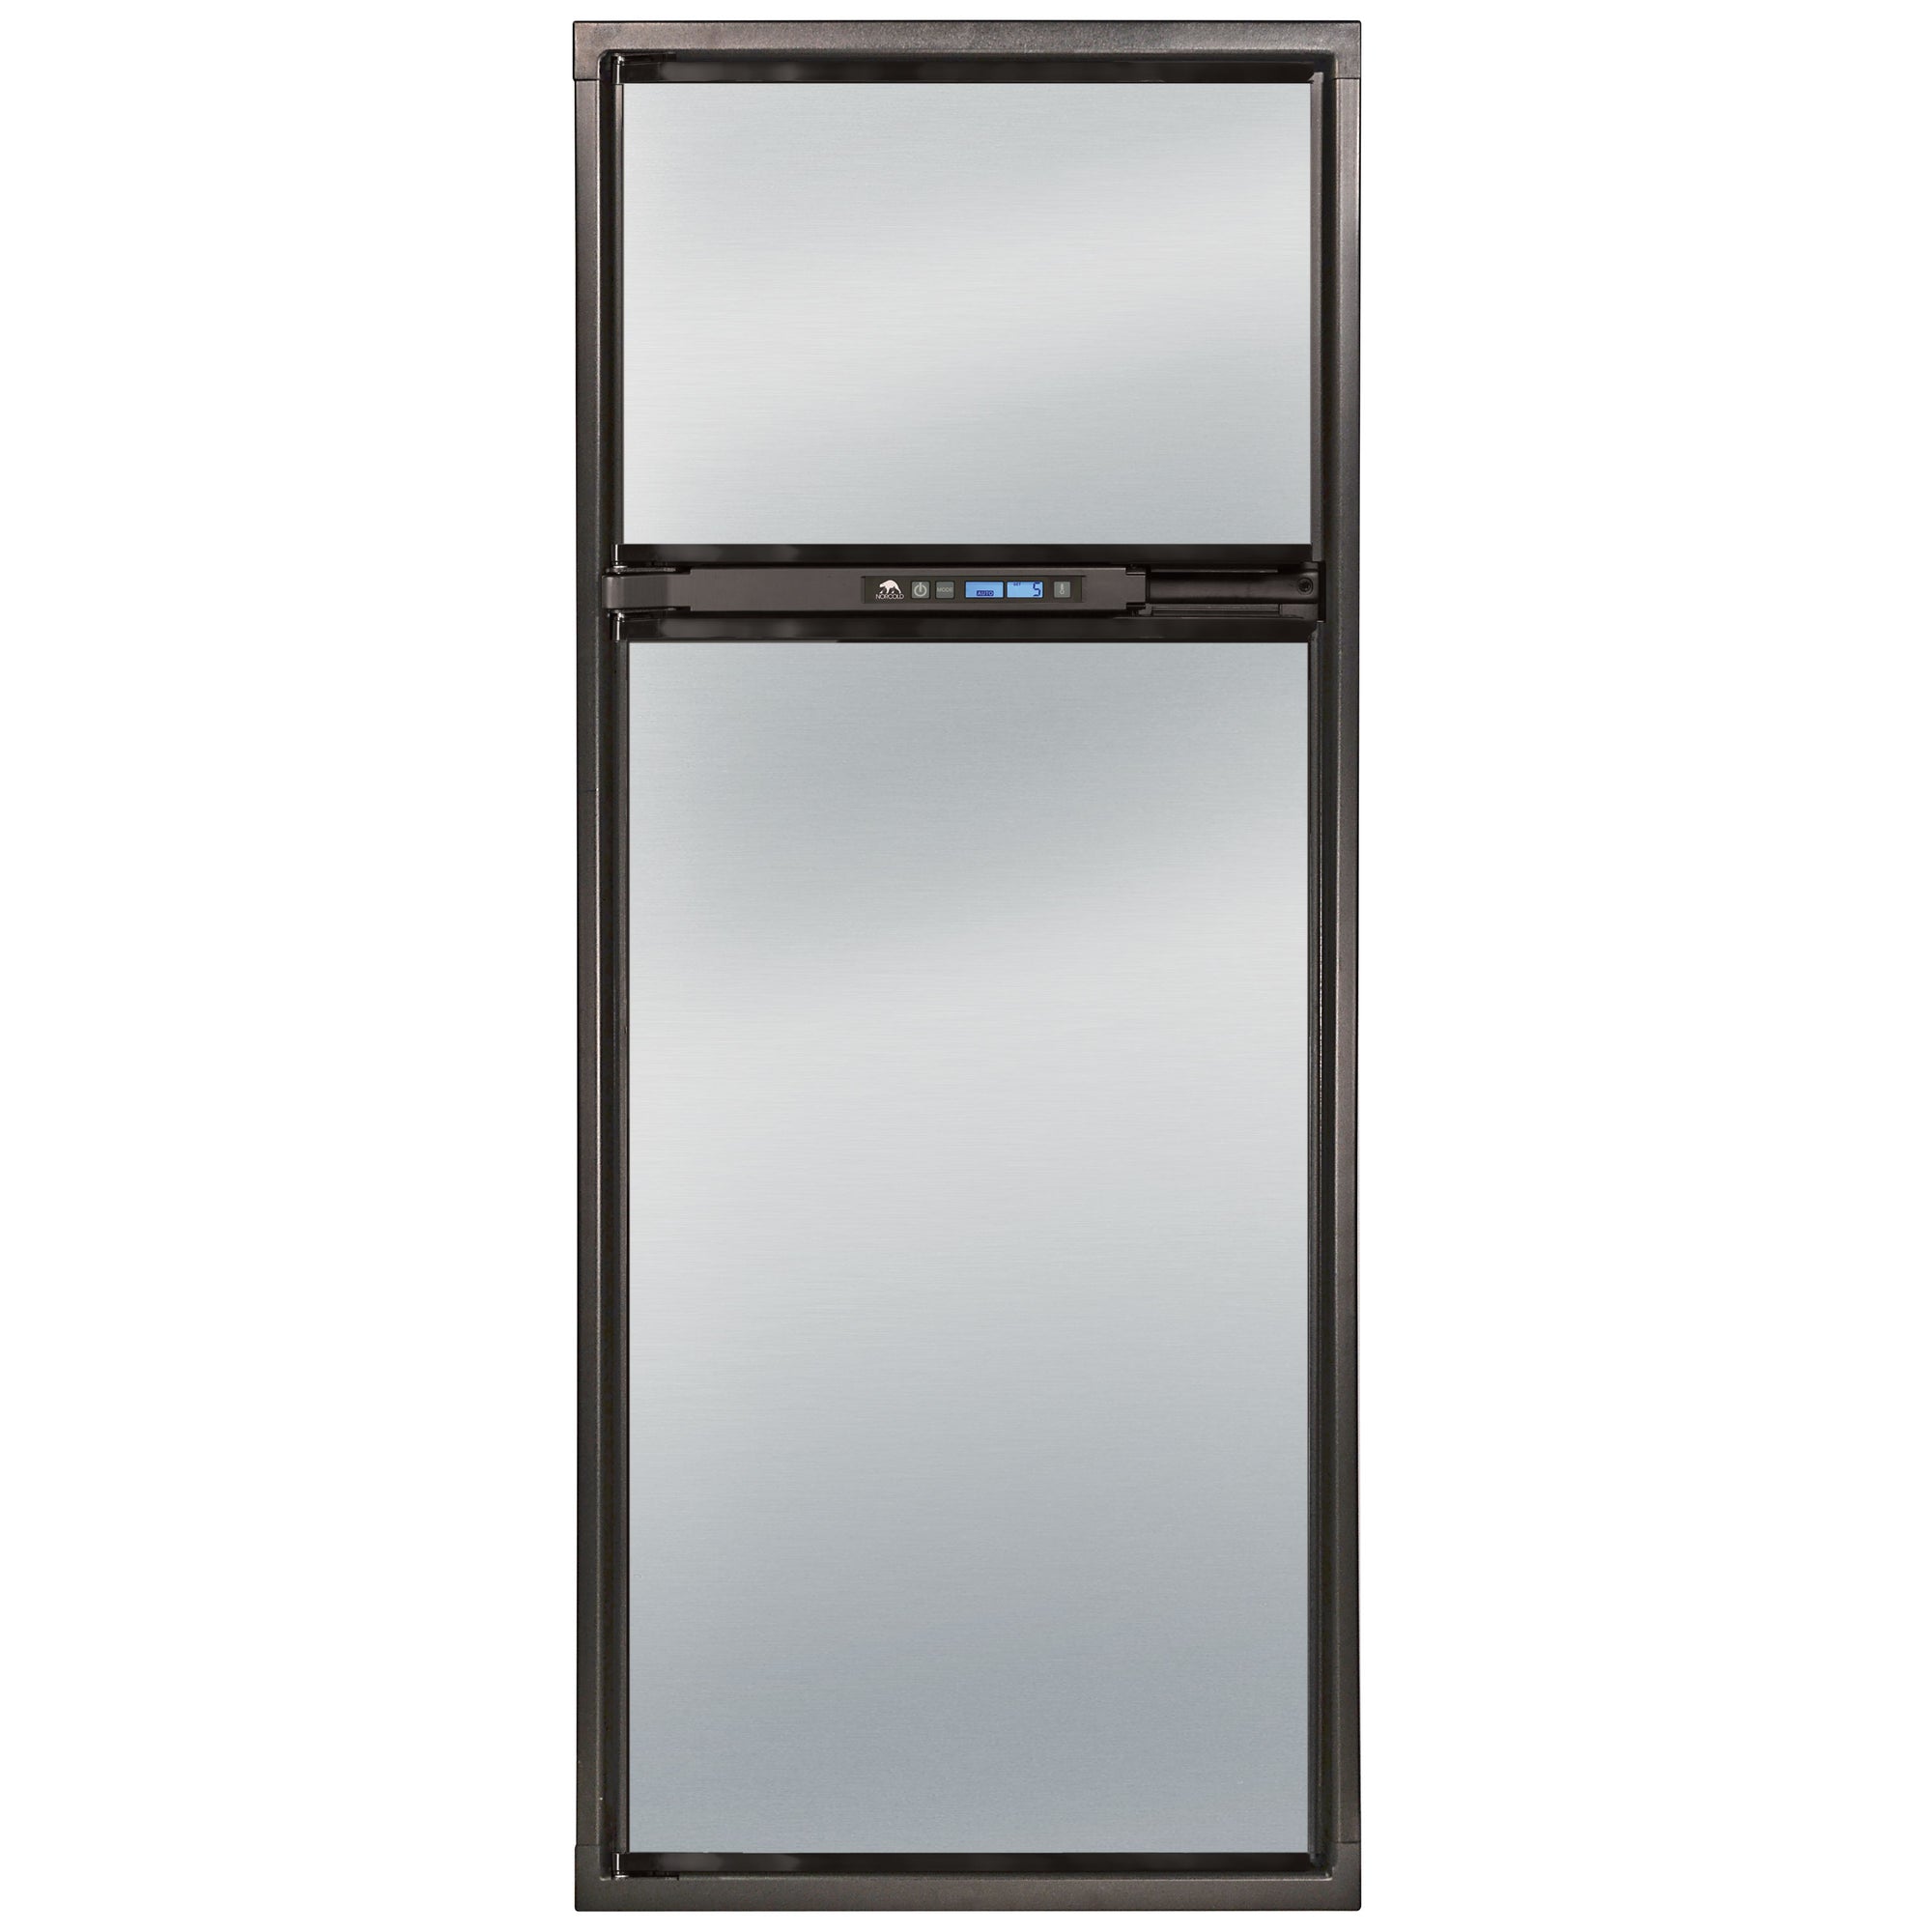 Norcold NA10LXIMR Polar 10LX Gas Absorption Refrigerator - 3-Way, LH, Ice Maker